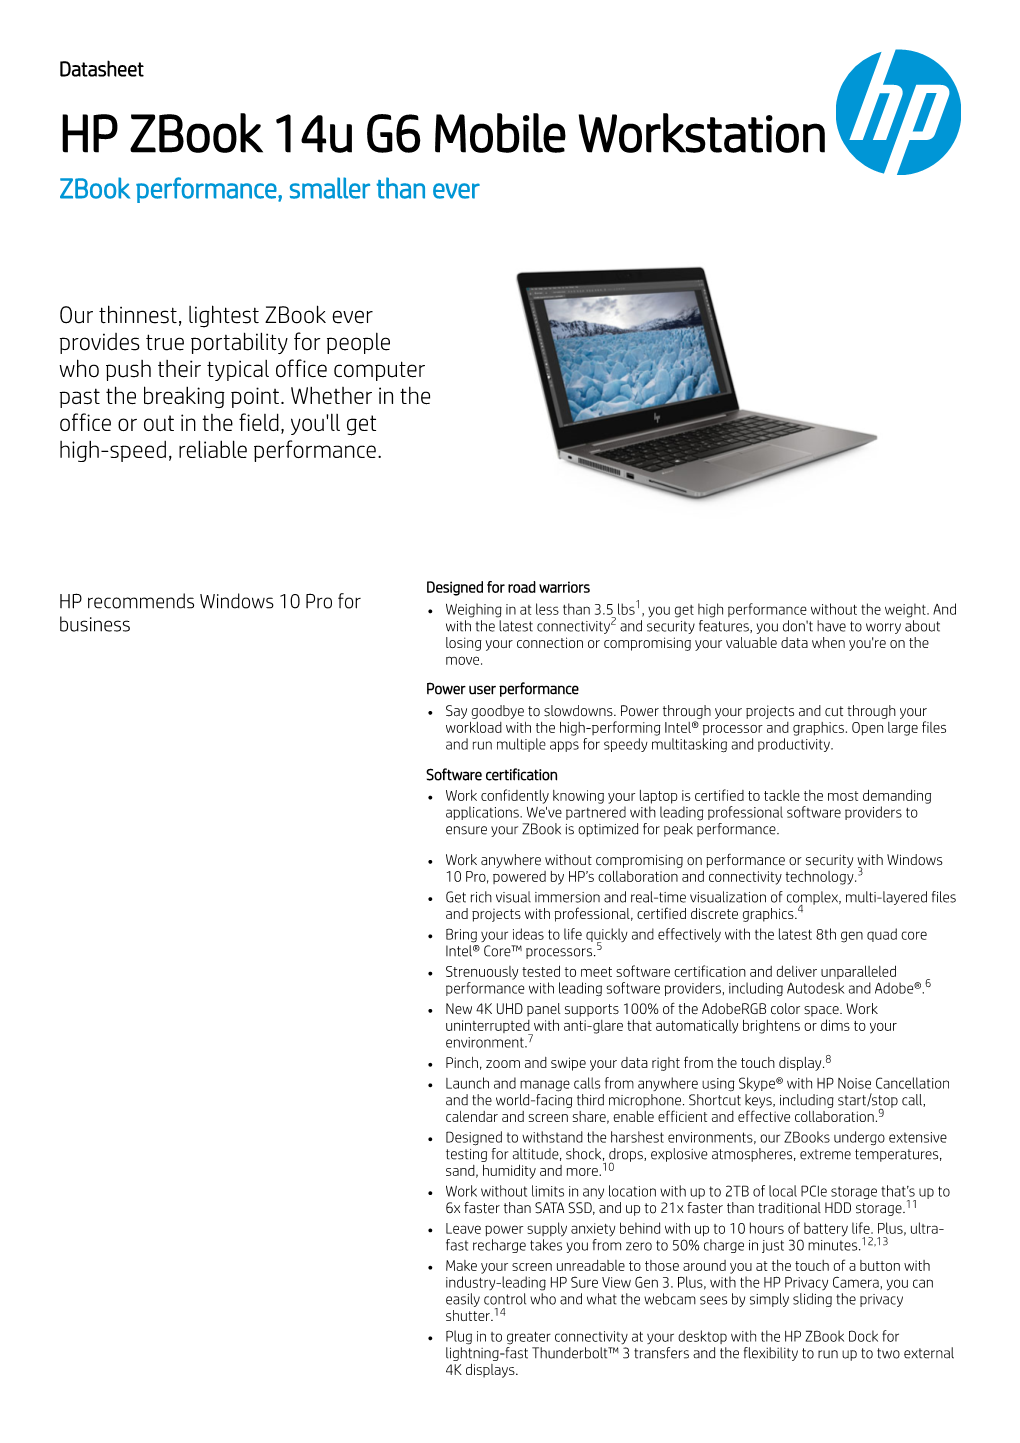 HP Zbook 14U G6 Mobile Workstation Zbook Performance, Smaller Than Ever